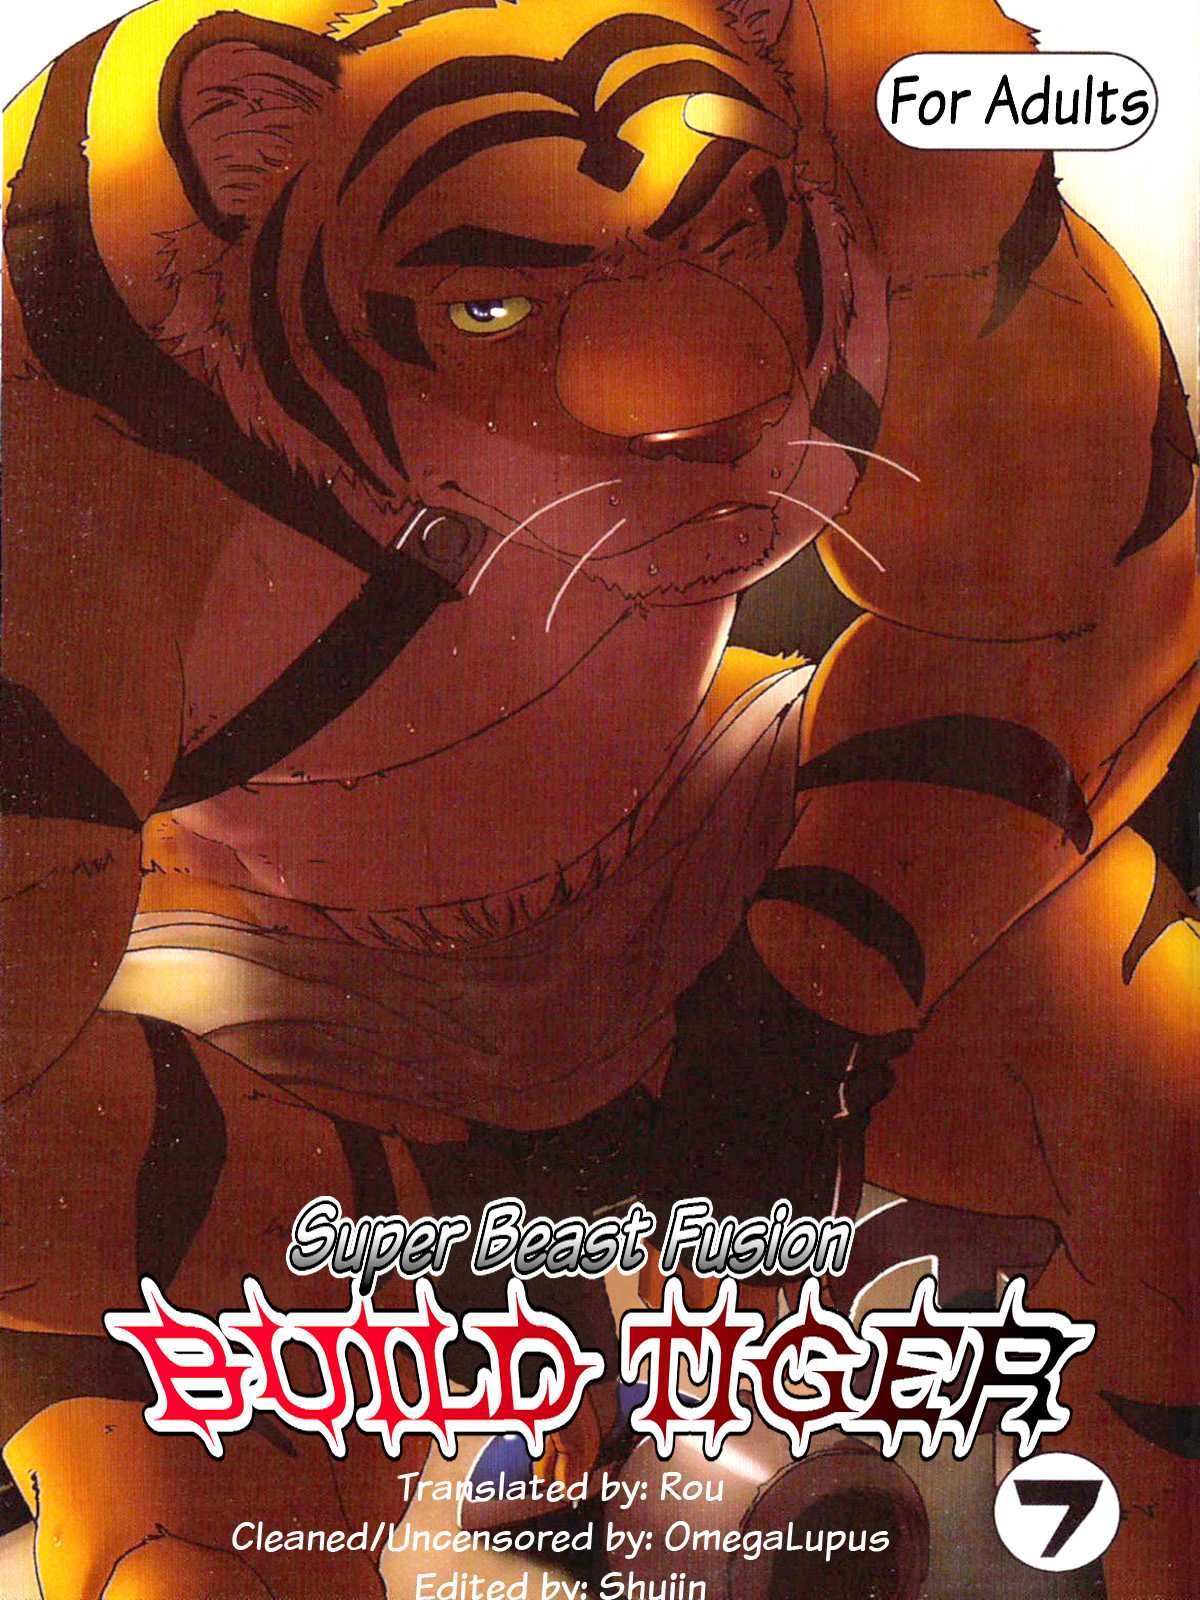 Gamma Dragon Heart Super Beast Fusion Build Tiger 07 Tiger Burning Out on the Ring